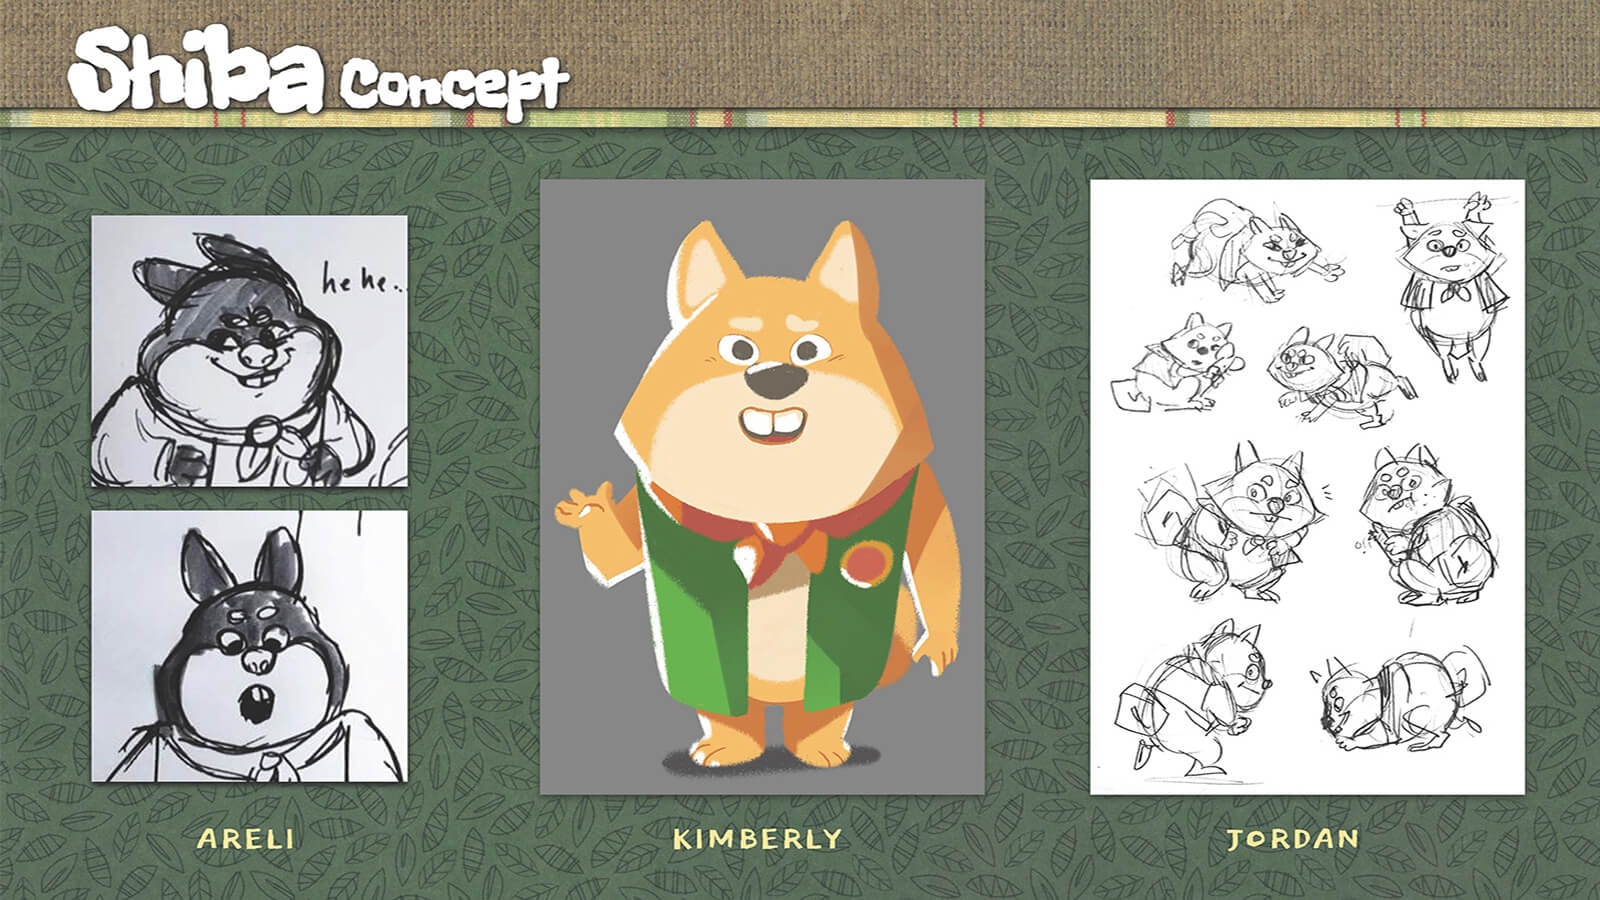 Concept art and sketches of the character Shiba.